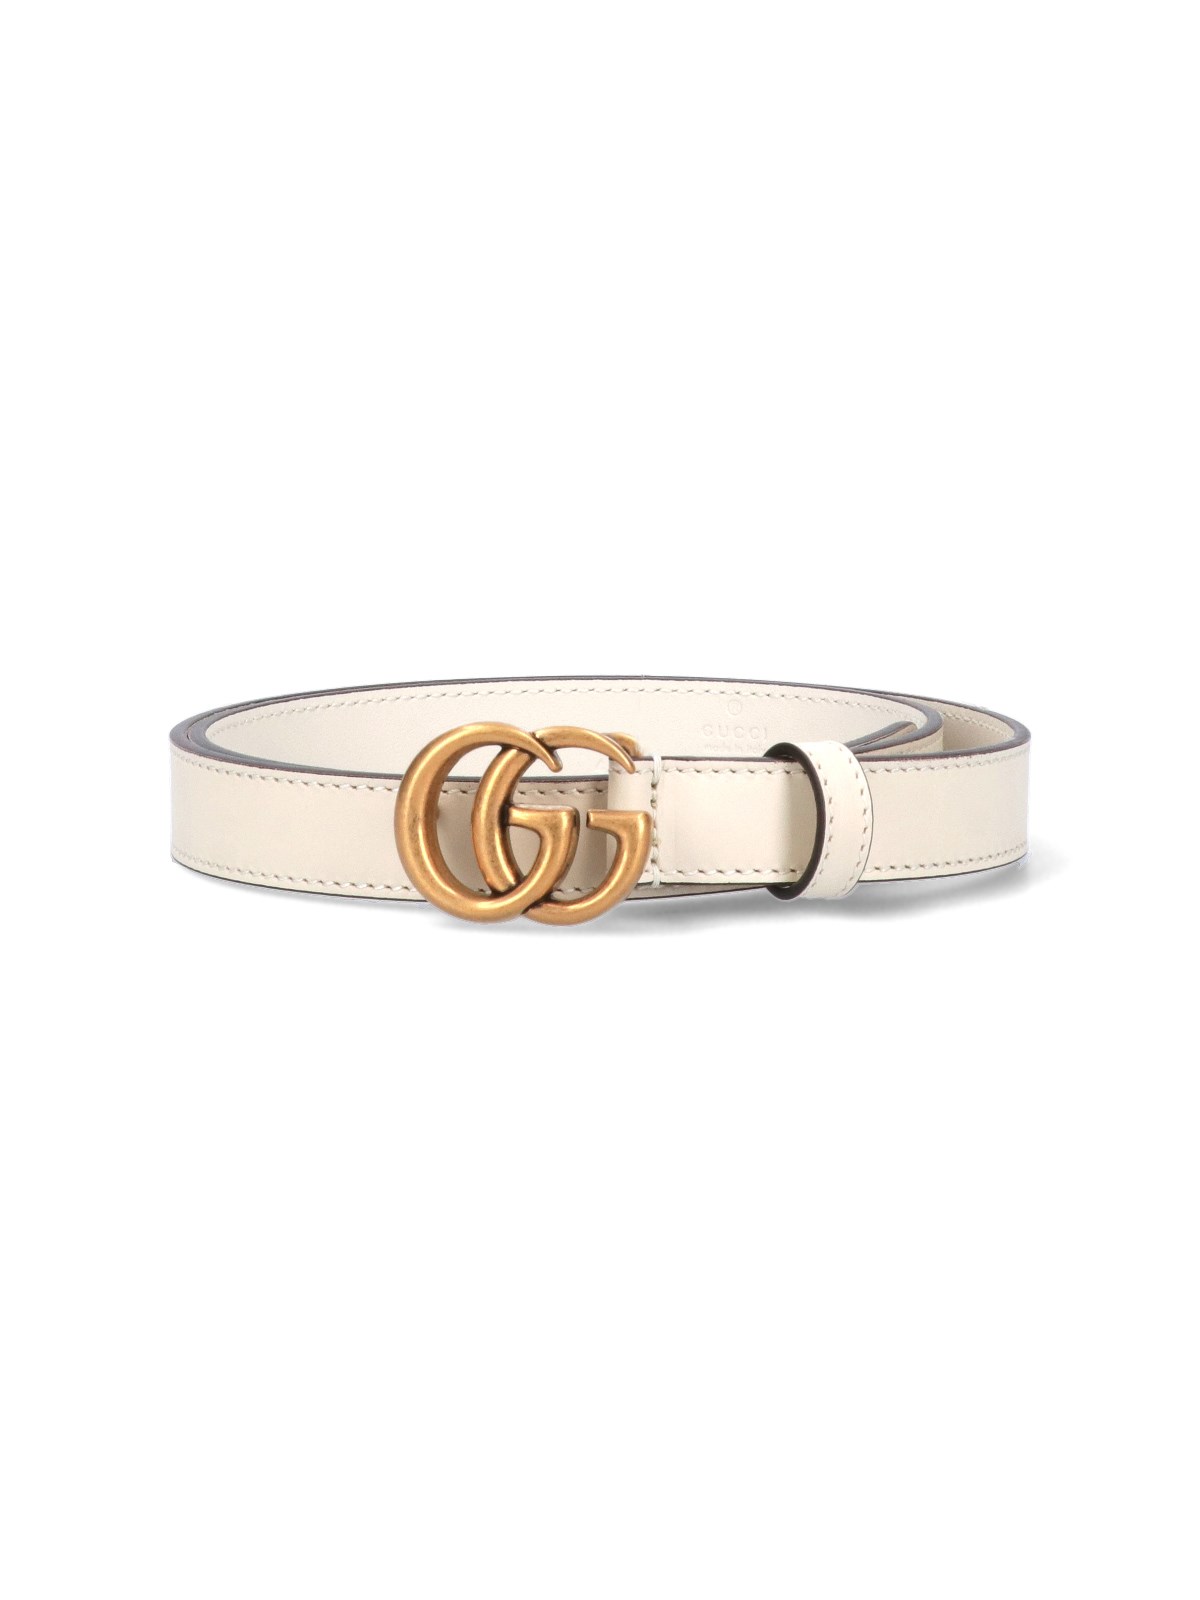 Gucci - "gg Marmont" Belt In White